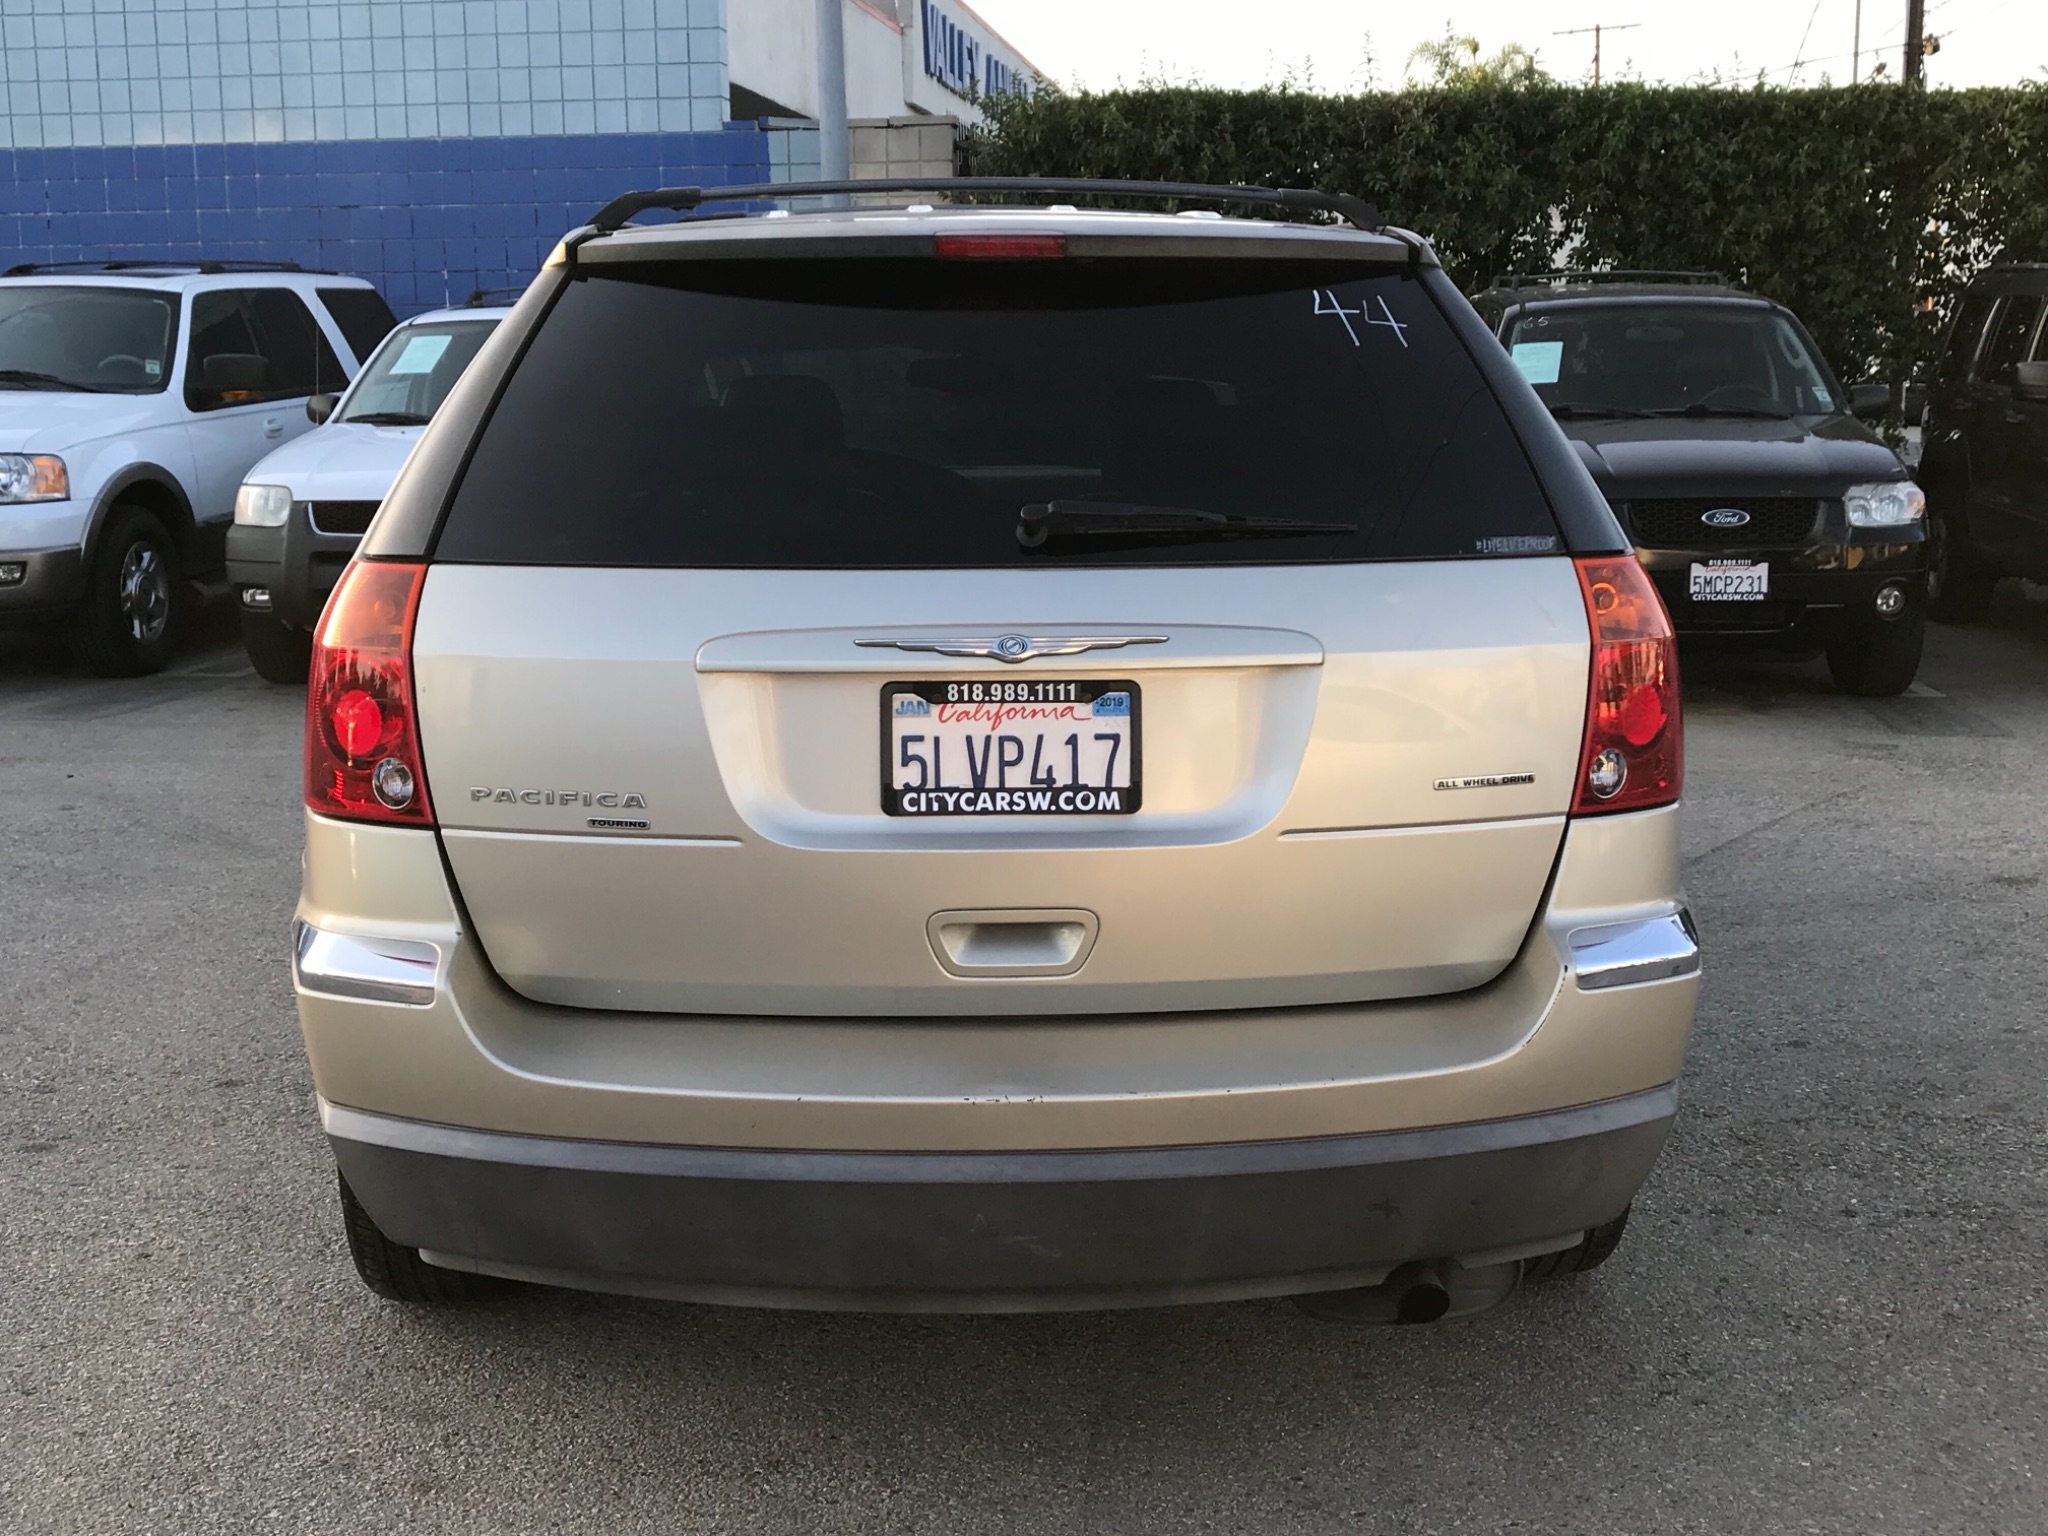 2005 Chrysler Pacifica Touring